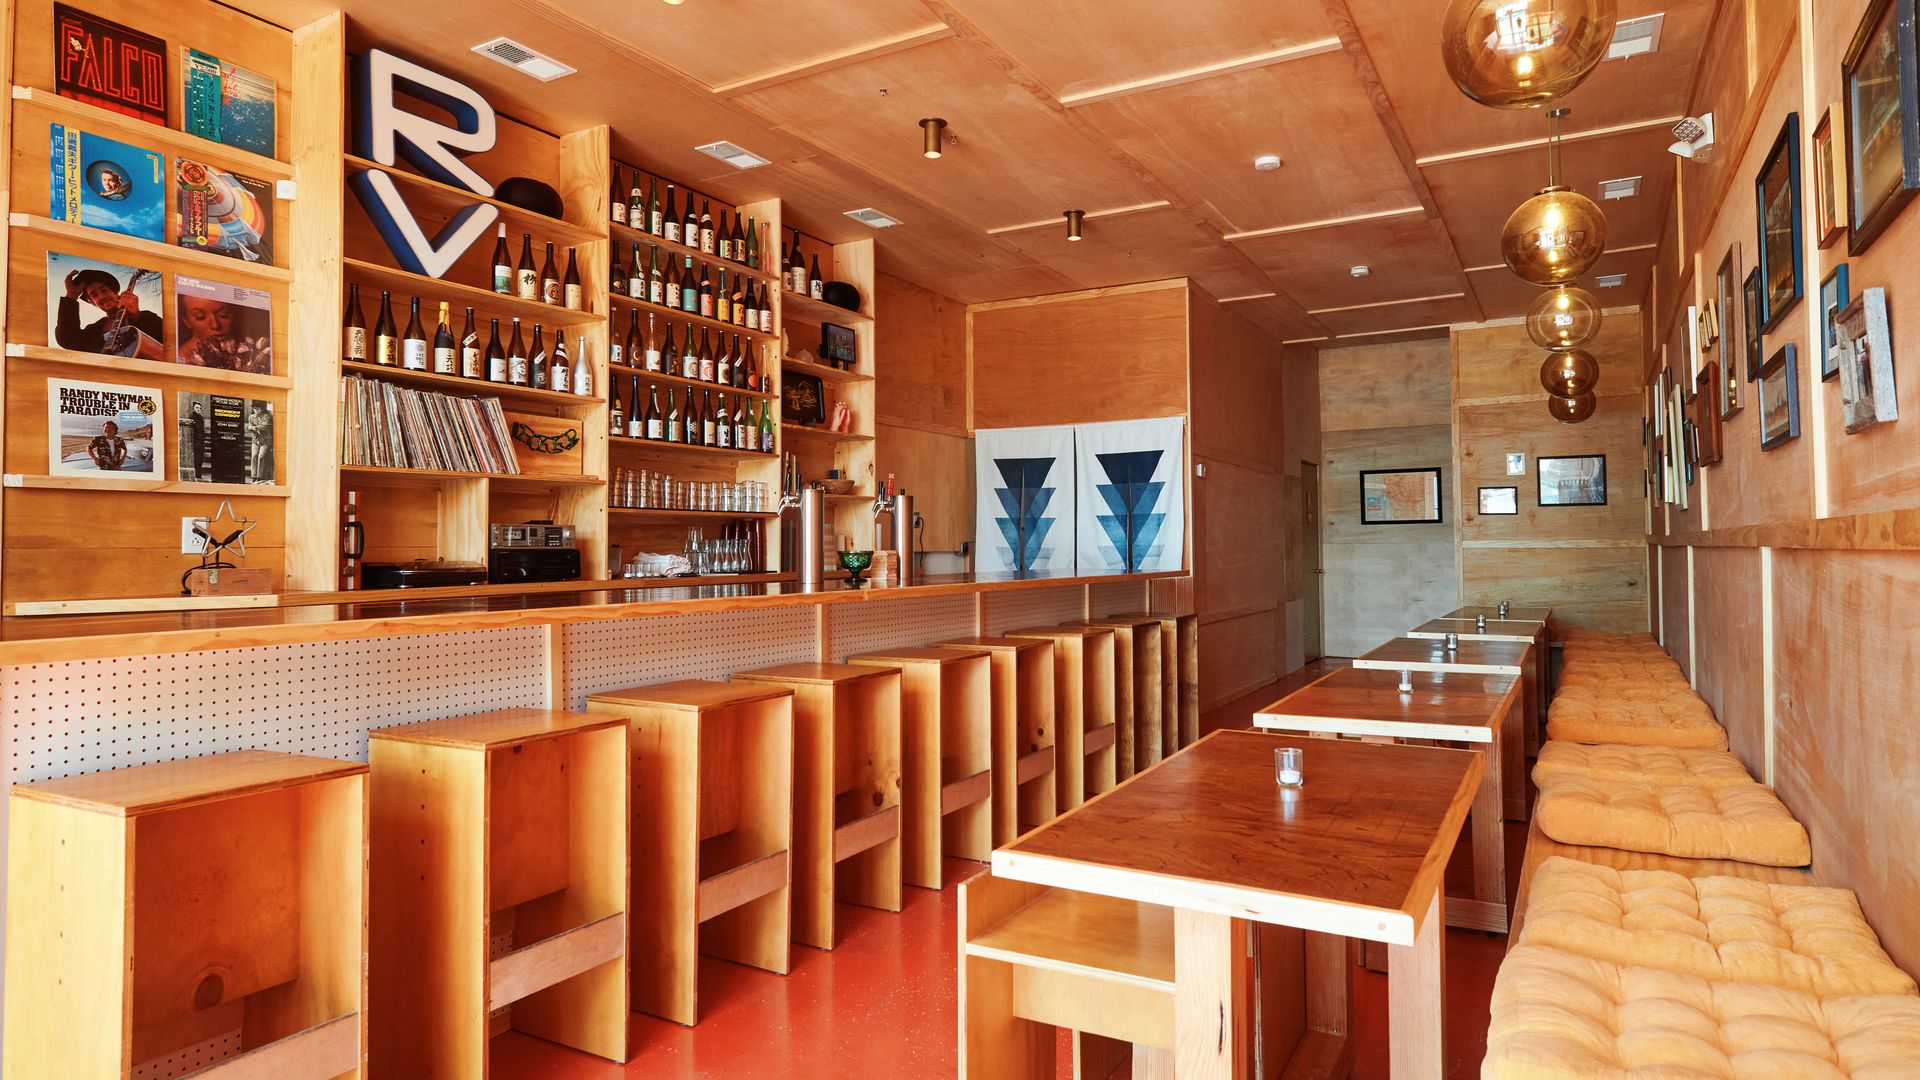 An empty sake bar is seen from an angle. The bar stools, bench seating and back bar are all built of light wood, and the back bar is filled with sake bottles and records.